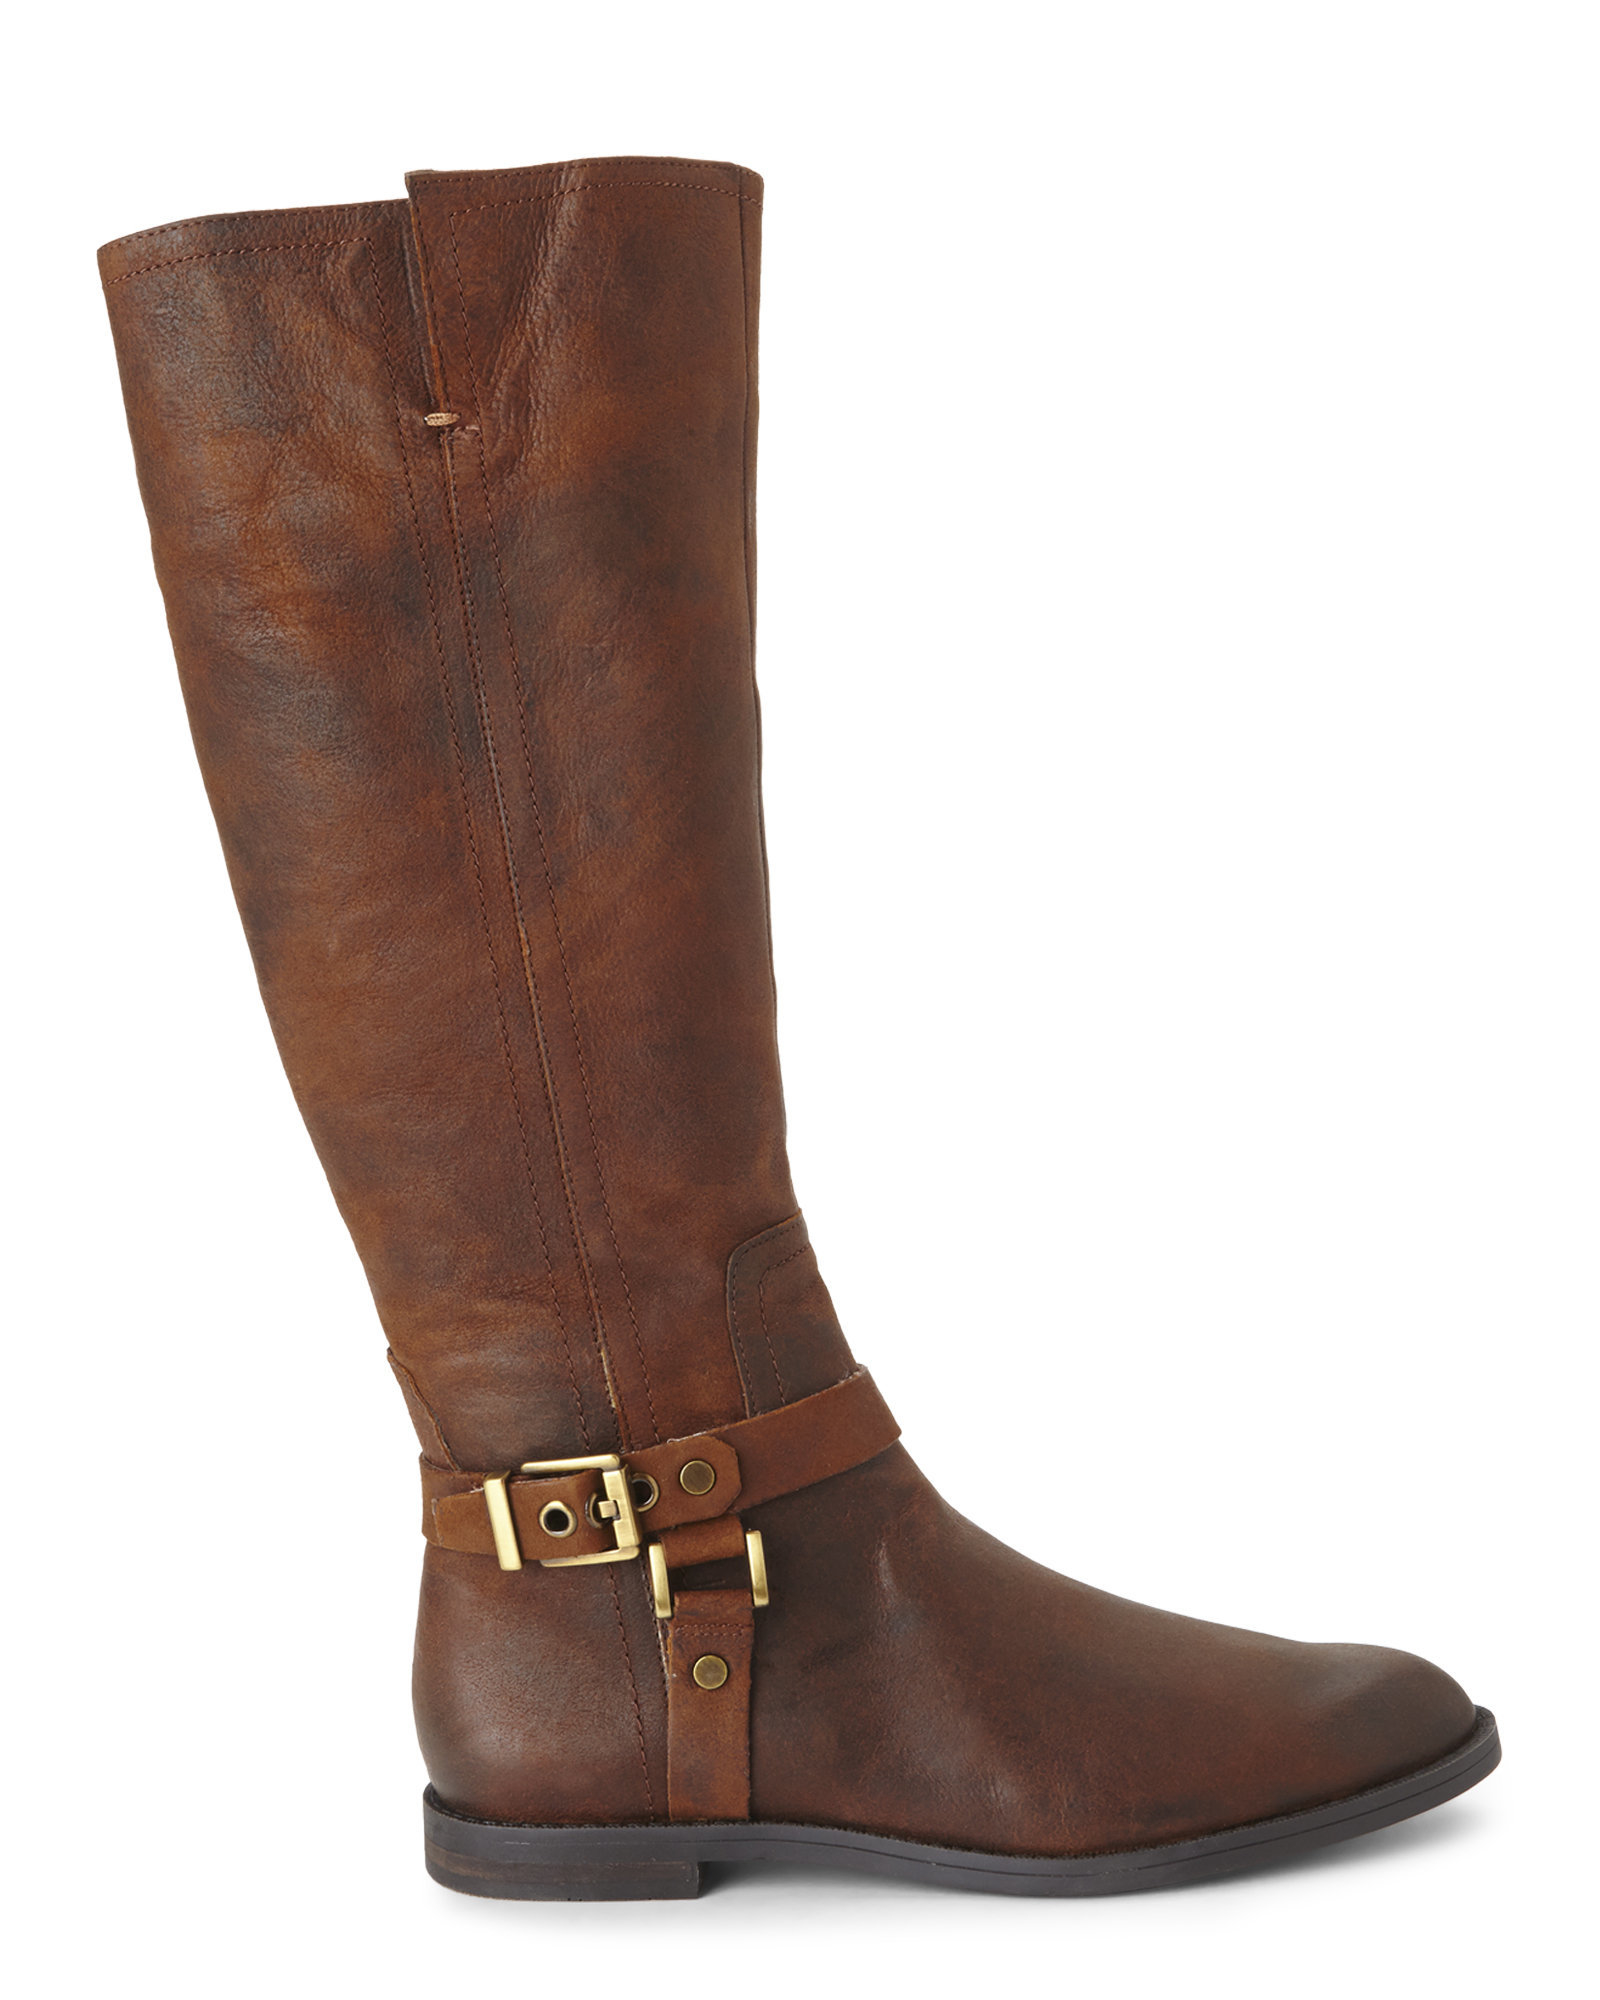 Lyst - Franco Sarto Vantage Leather Knee-High Boots in Brown